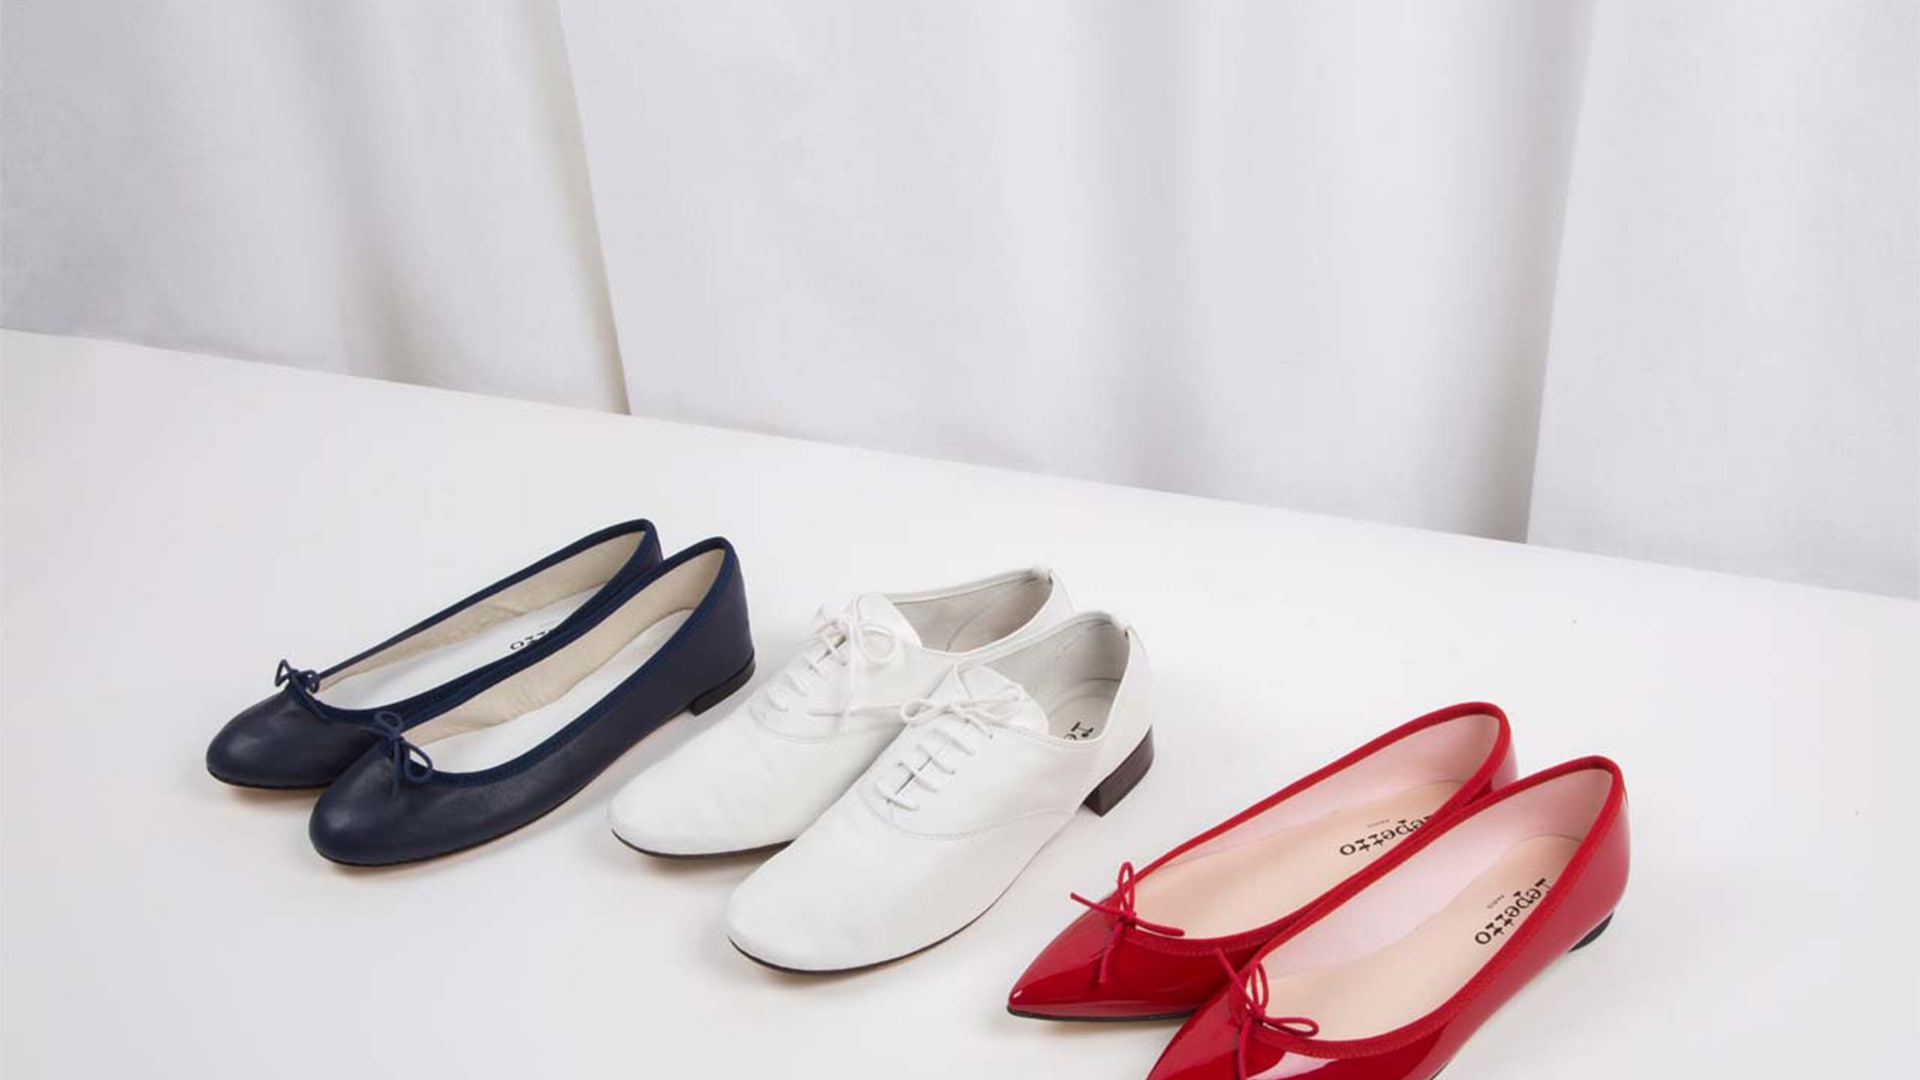 Repetto Singapore | Shoes | The Shoppes at Marina Bay Sands l